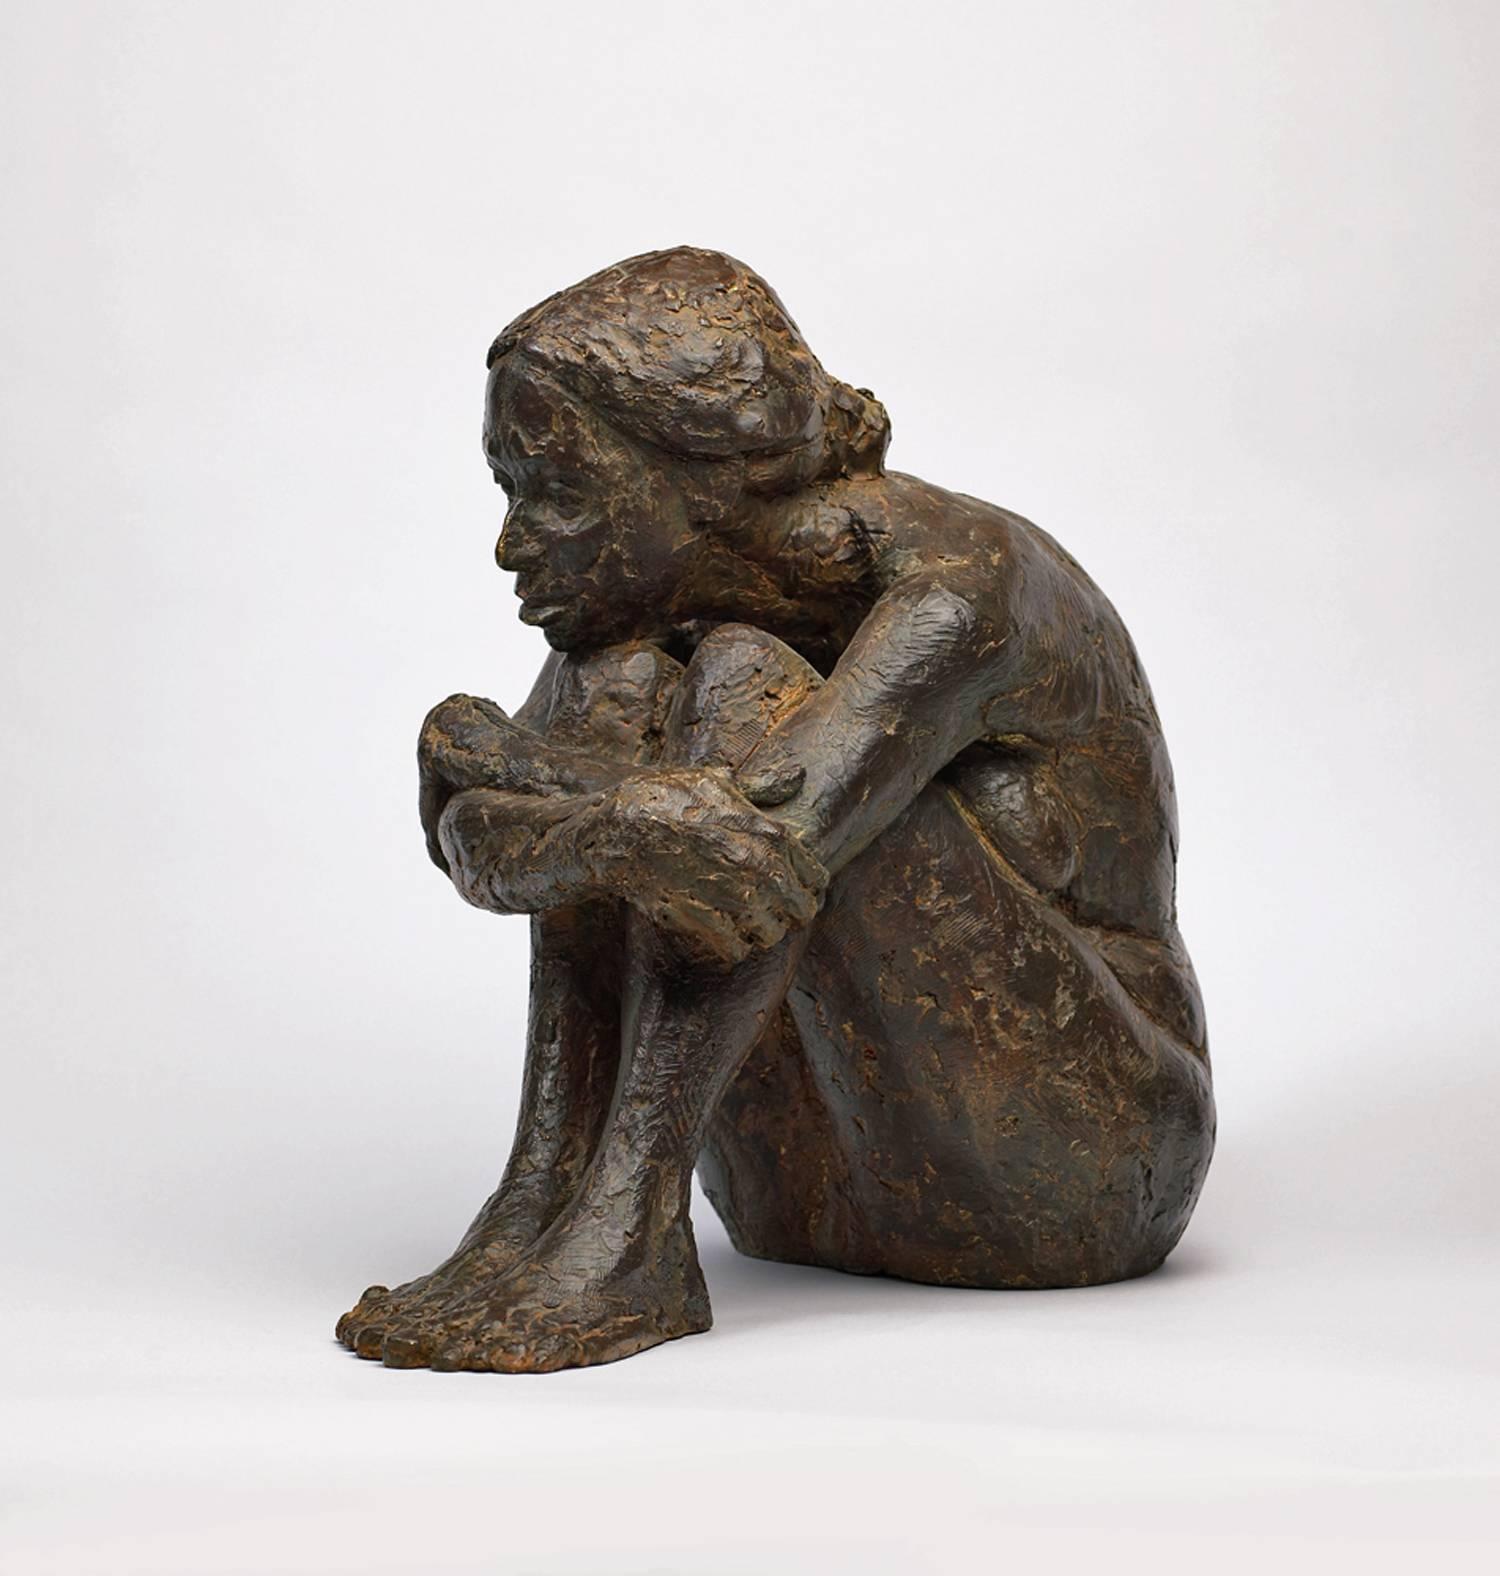 Seated Figure - Sculpture by Peter Brooke